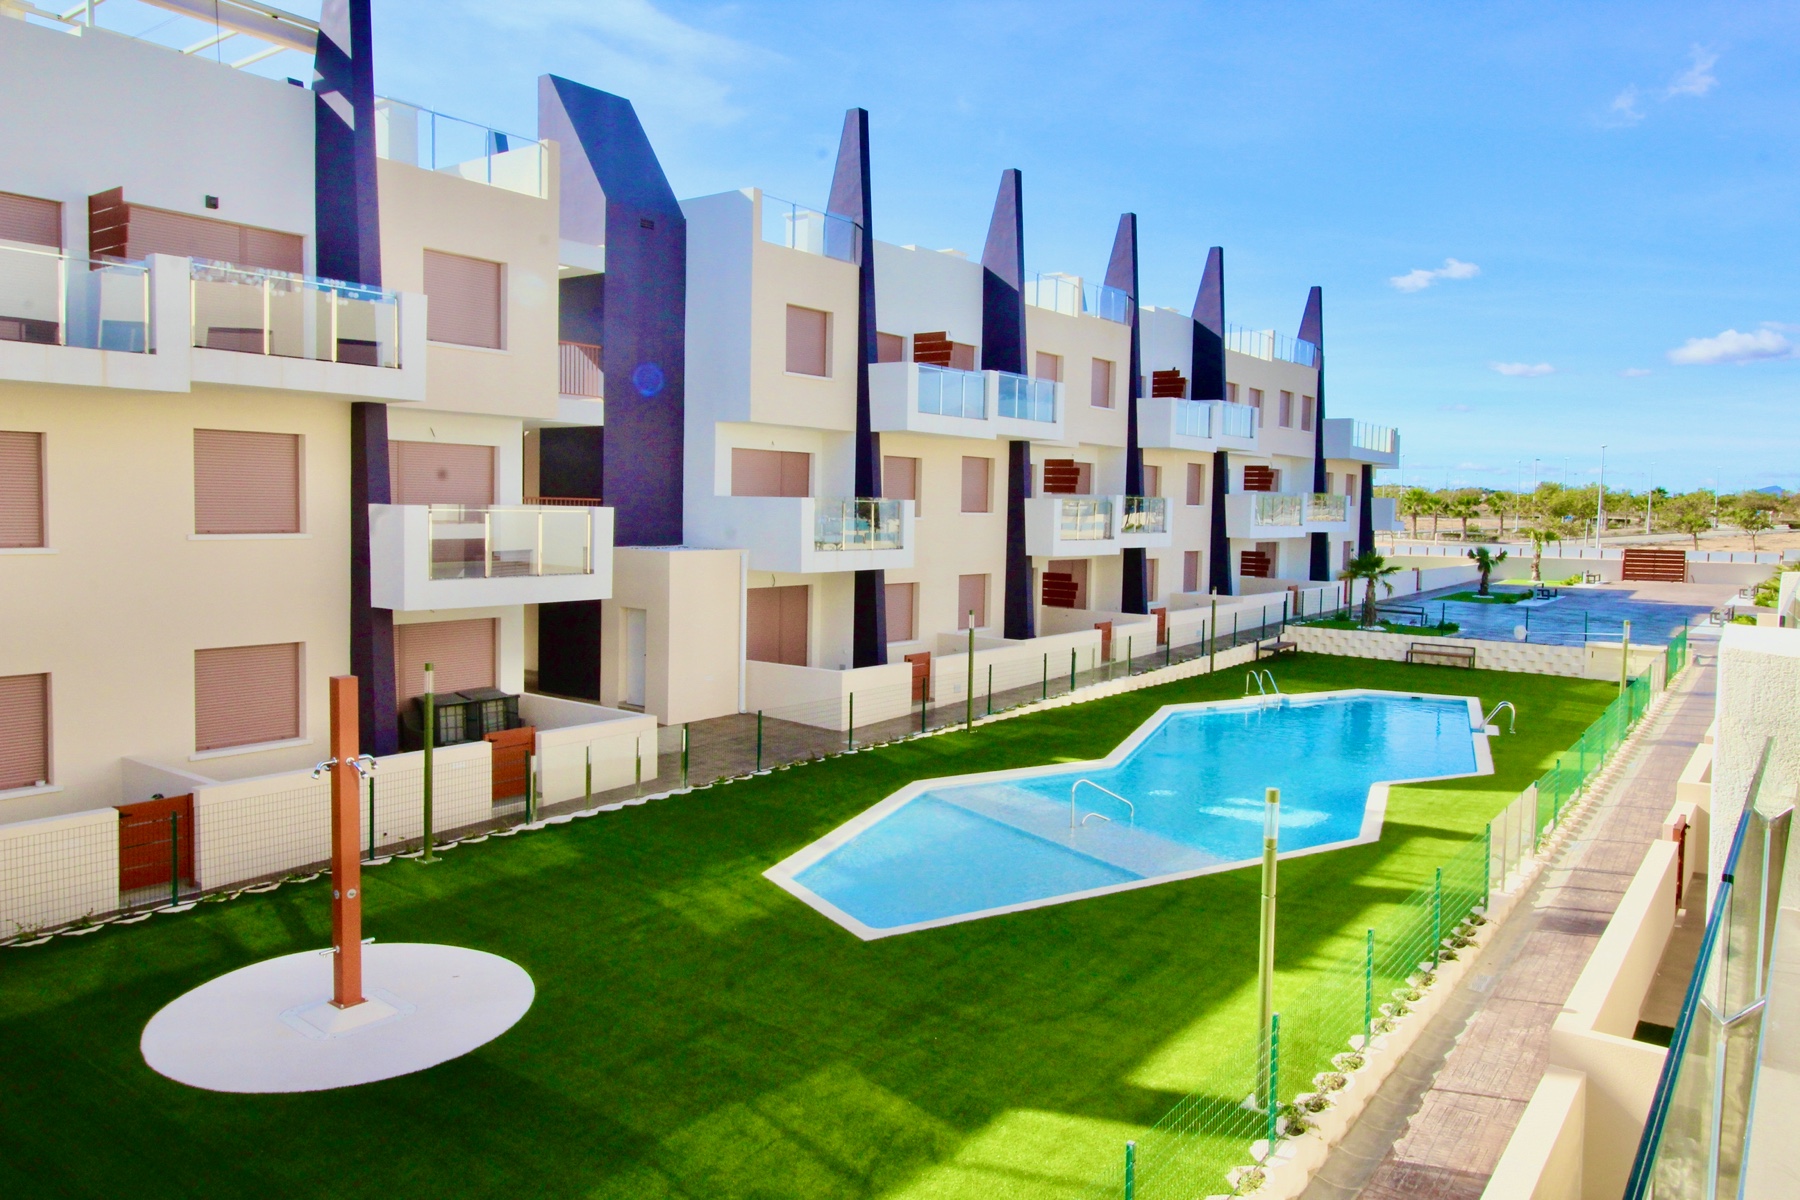 For sale: 2 bedroom apartment / flat in Mil Palmeras, Costa Blanca